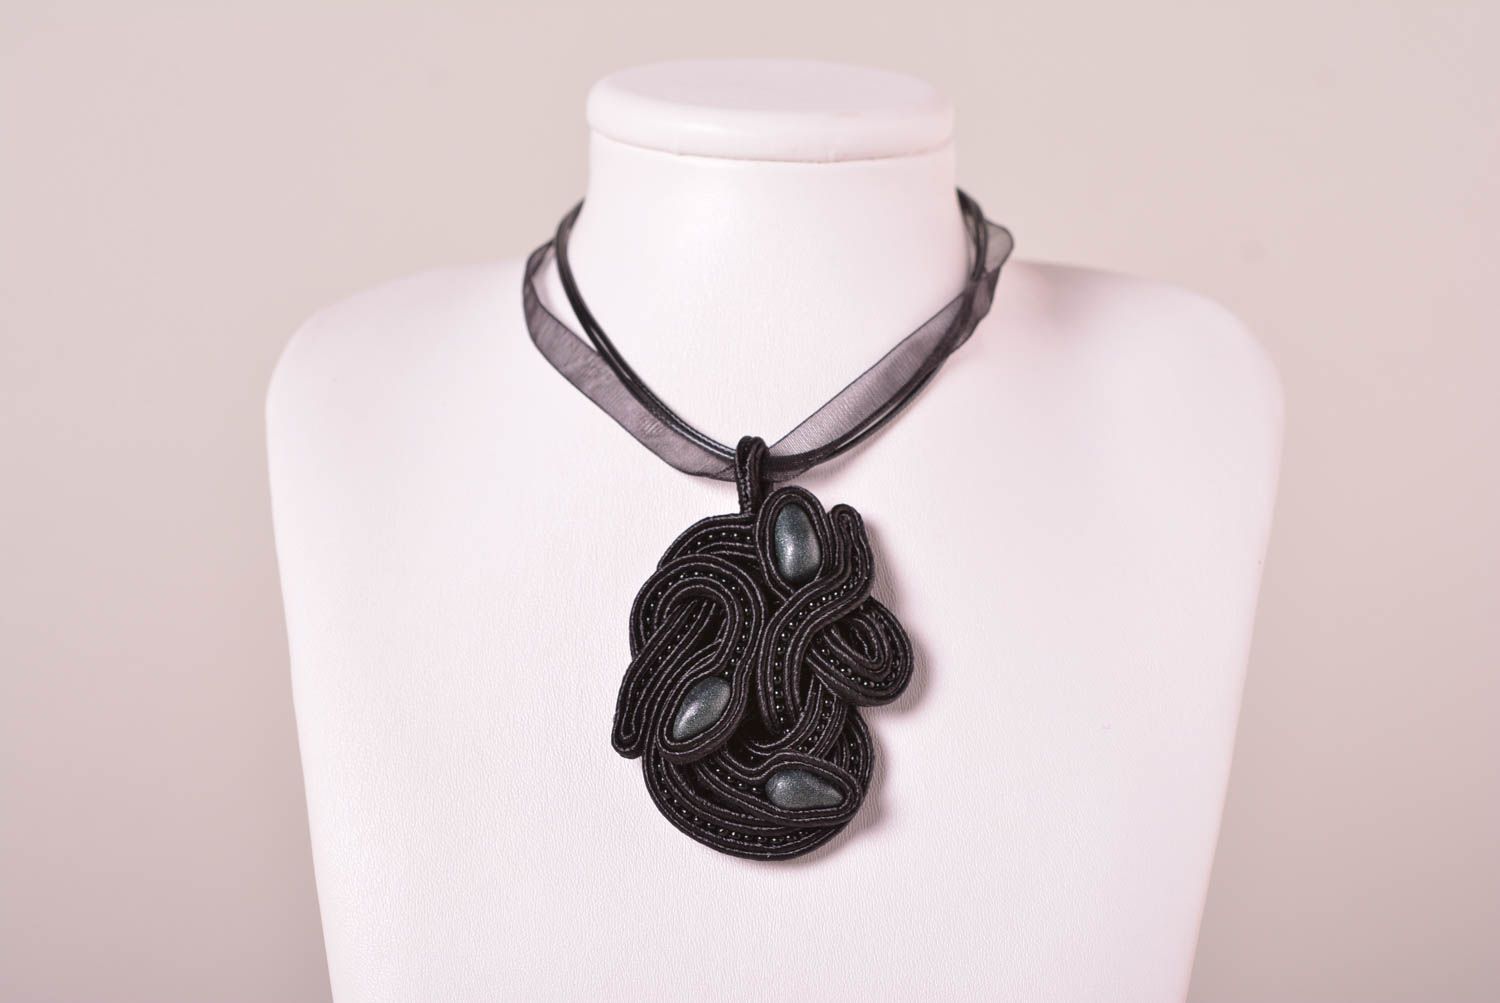 Handmade soutache pendant necklace charm necklace unique jewelry gifts for lady photo 2